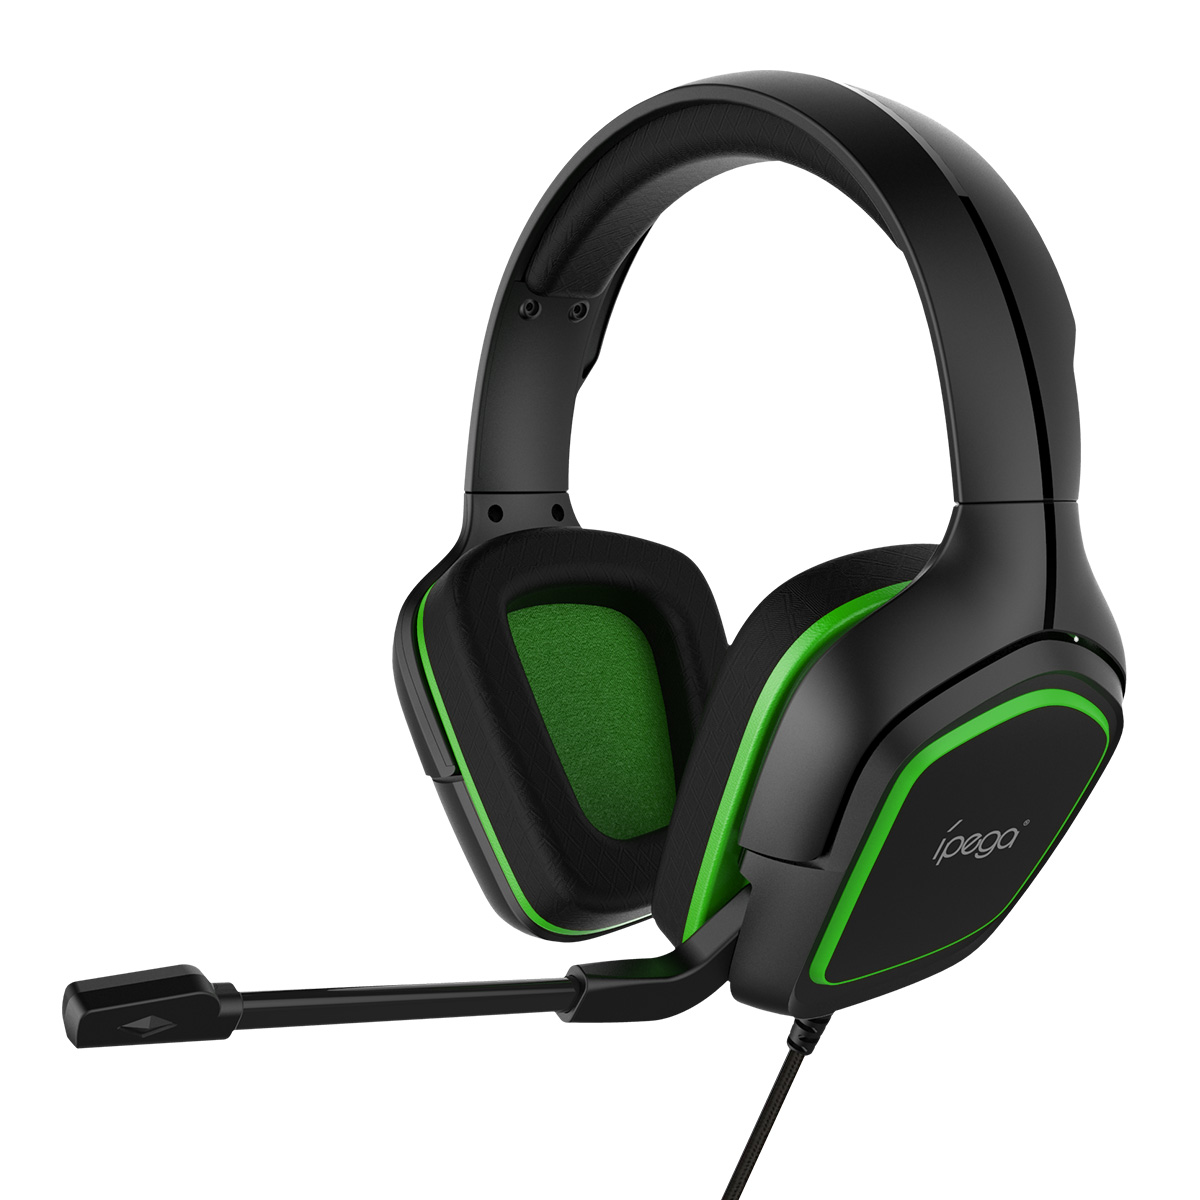 PG-R006G headset with headset